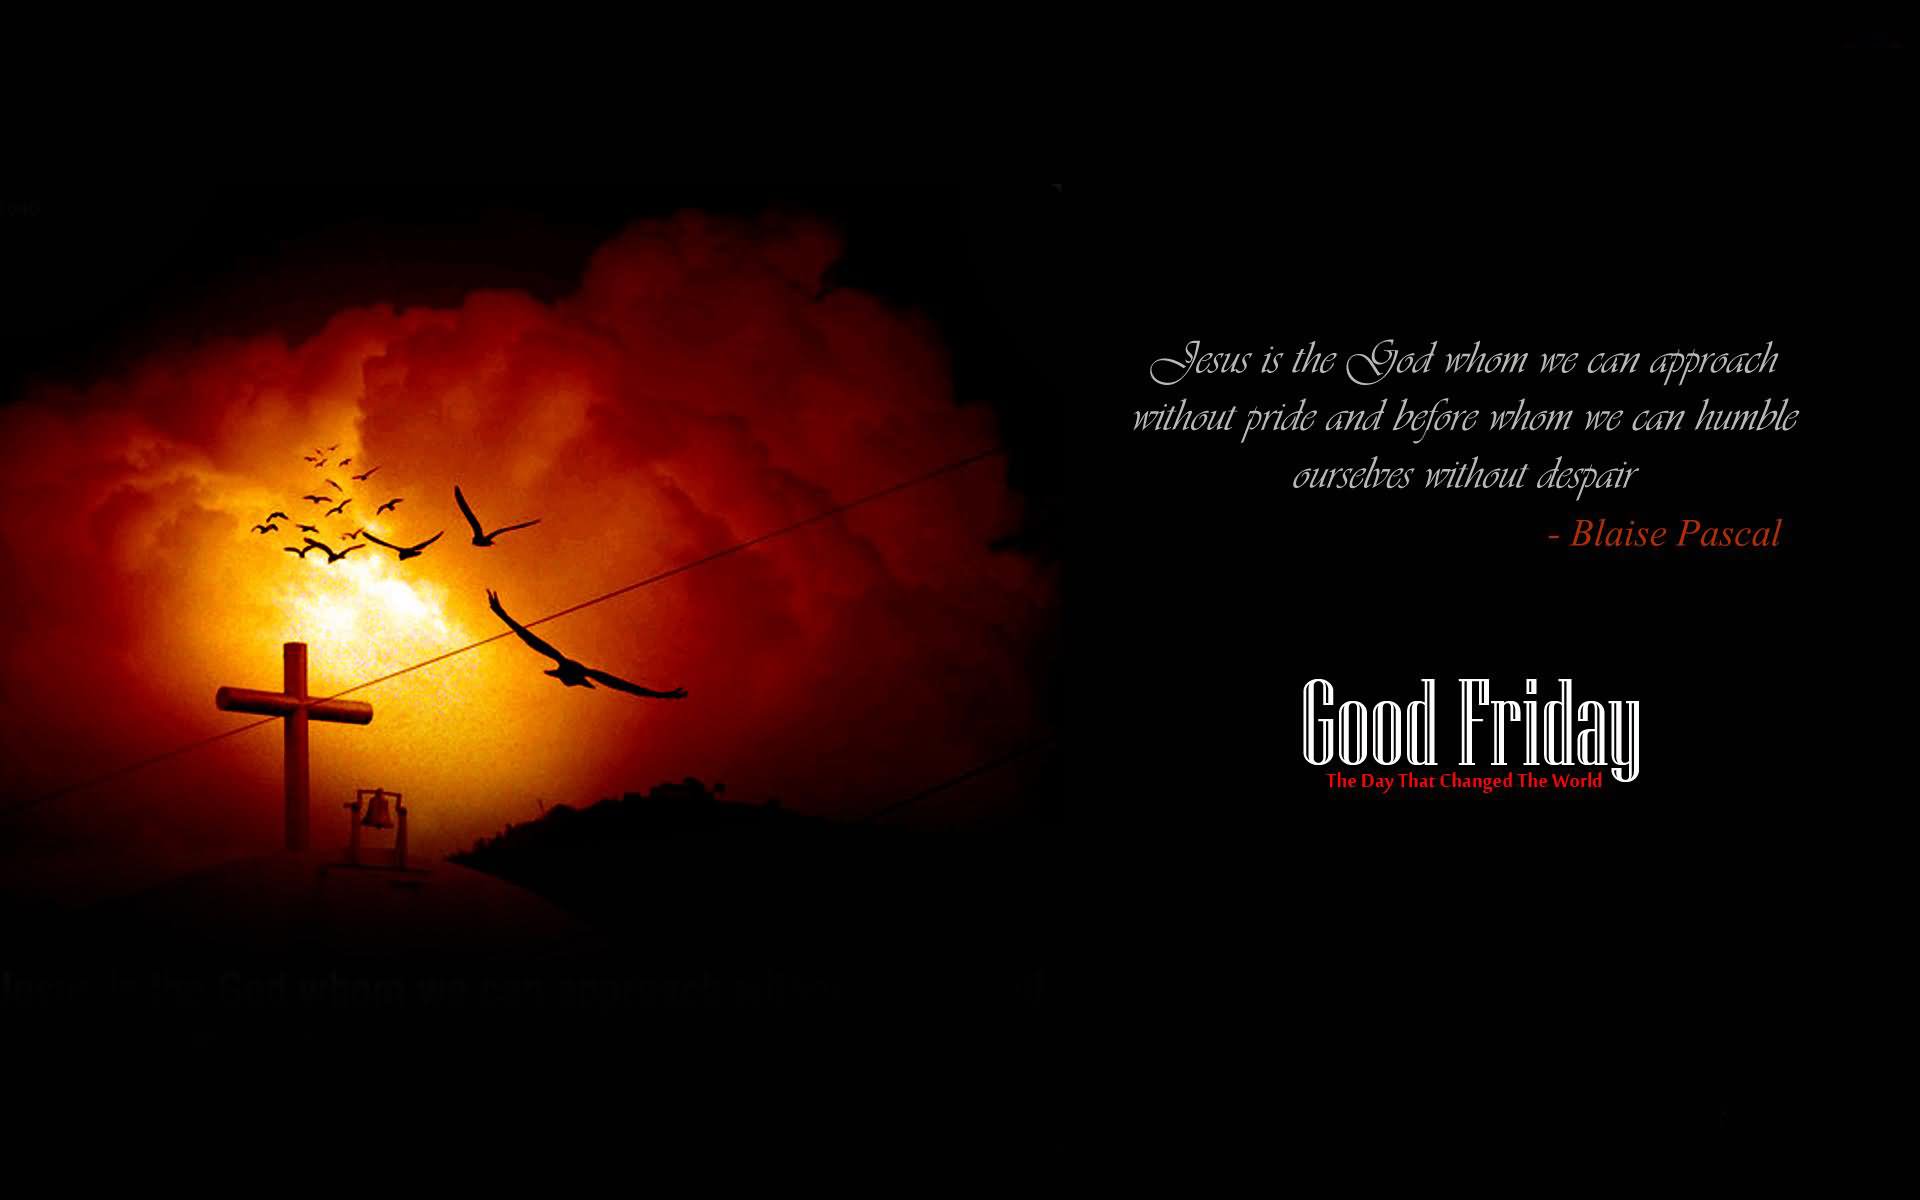 Good Friday Wishes HD Wallpaper Image